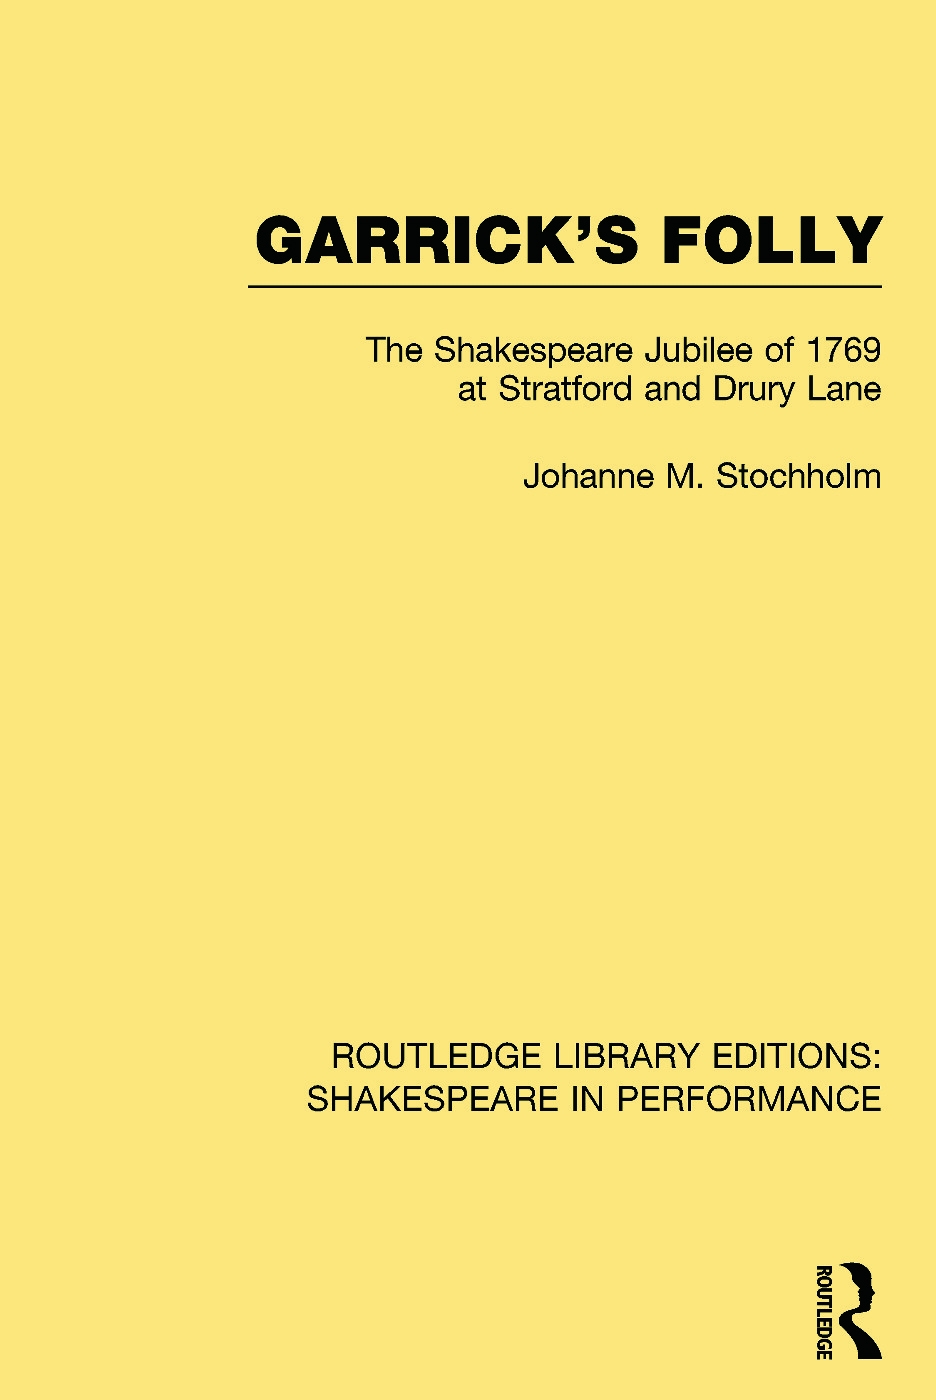 Garrick’s Folly: The Shakespeare Jubilee of 1769 at Stratford and Drury Lane